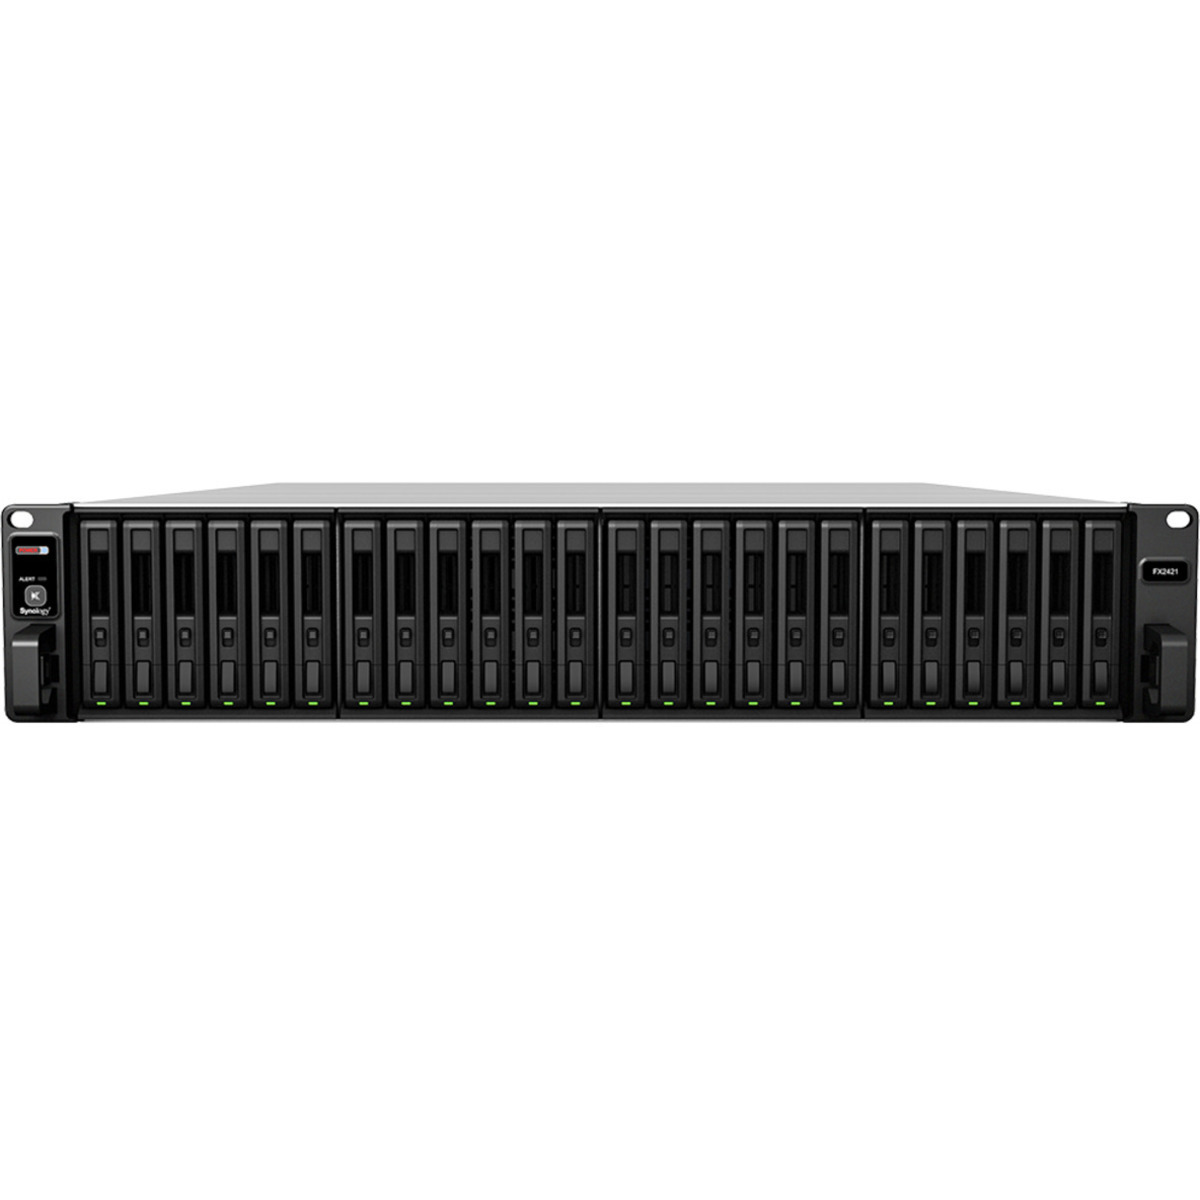 buy $6223 Synology FX2421 24tb RackMount Expansion Enclosure 24x1000gb Samsung 870 QVO MZ-77Q1T0 2.5 SATA 6Gb/s SSD CONSUMER Class Drives Installed - Burn-In Tested - nas headquarters buy network attached storage server device das new raid-5 free shipping usa FX2421